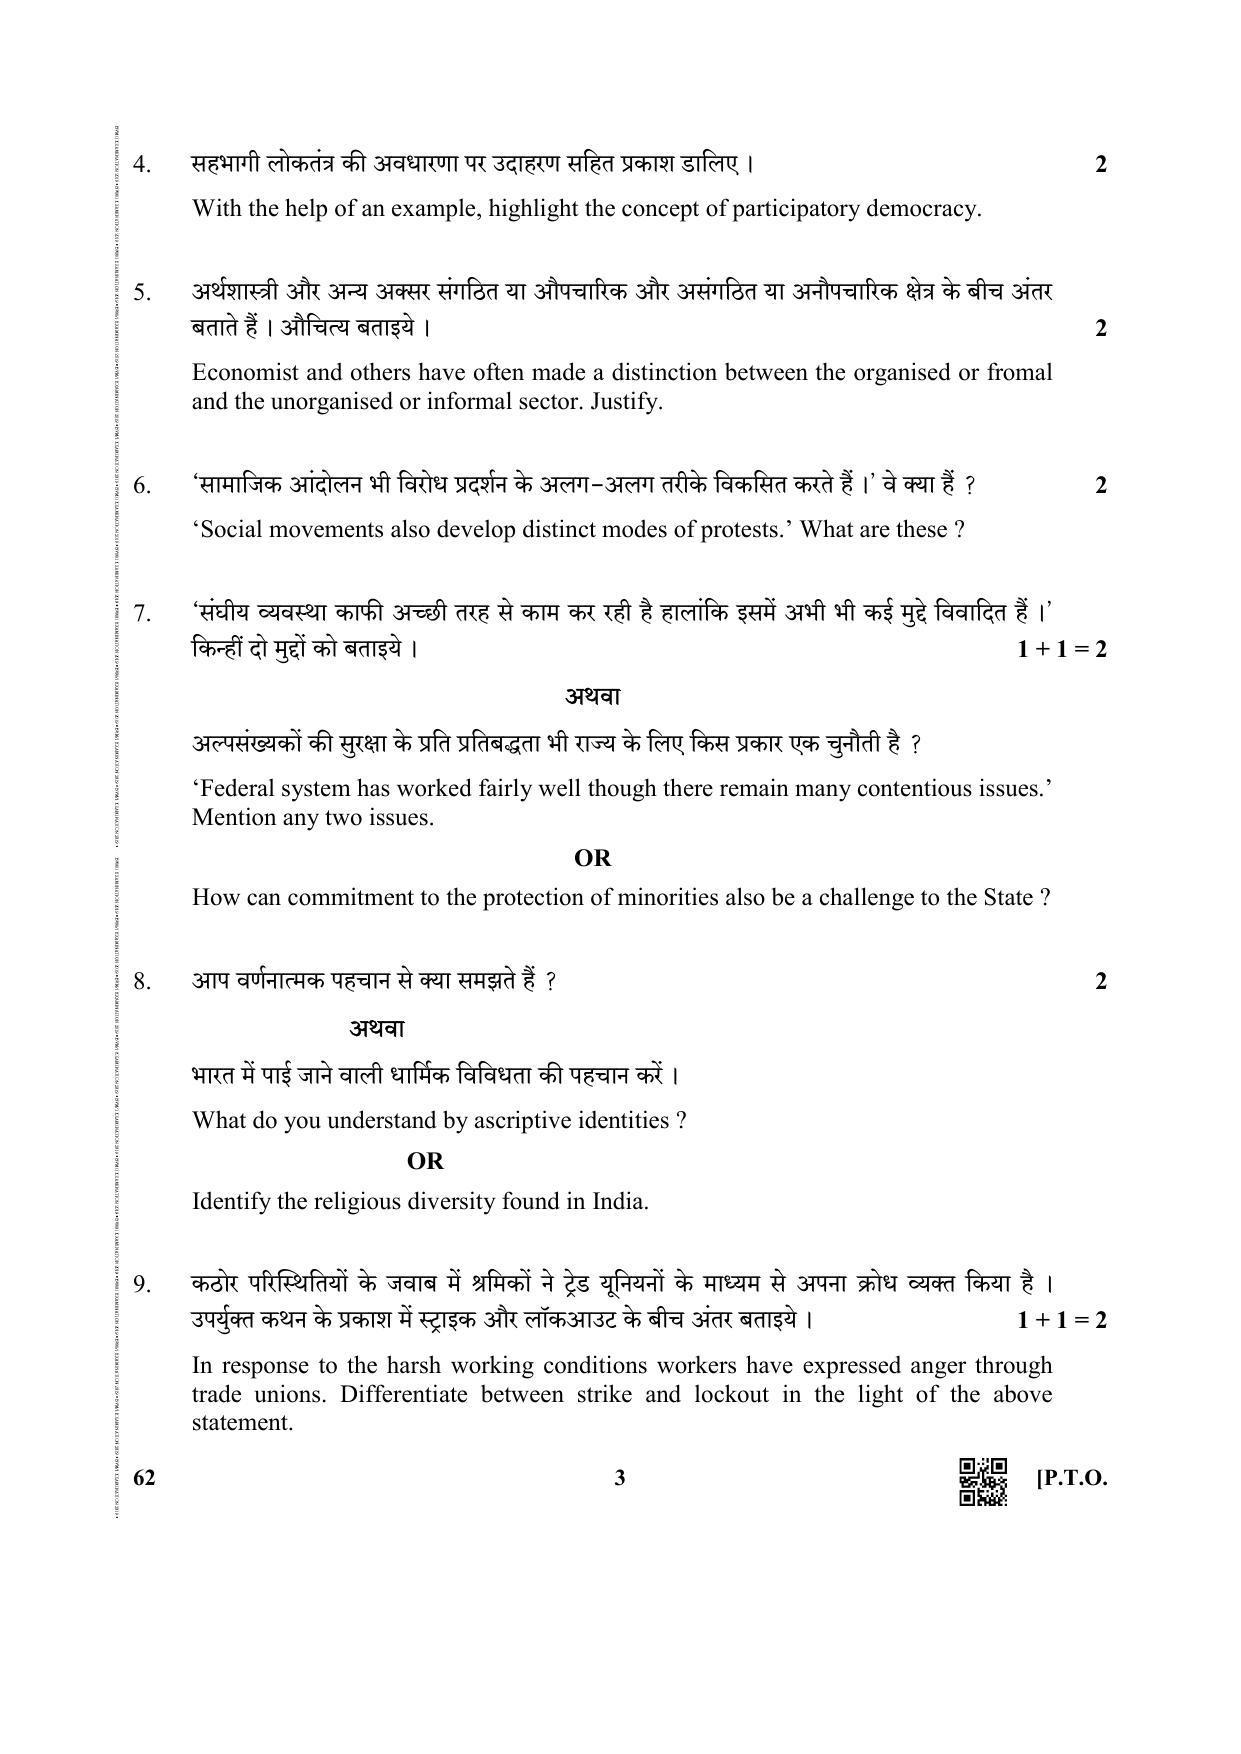 CBSE Class 12 62 (Sociology) 2019 Question Paper - Page 3